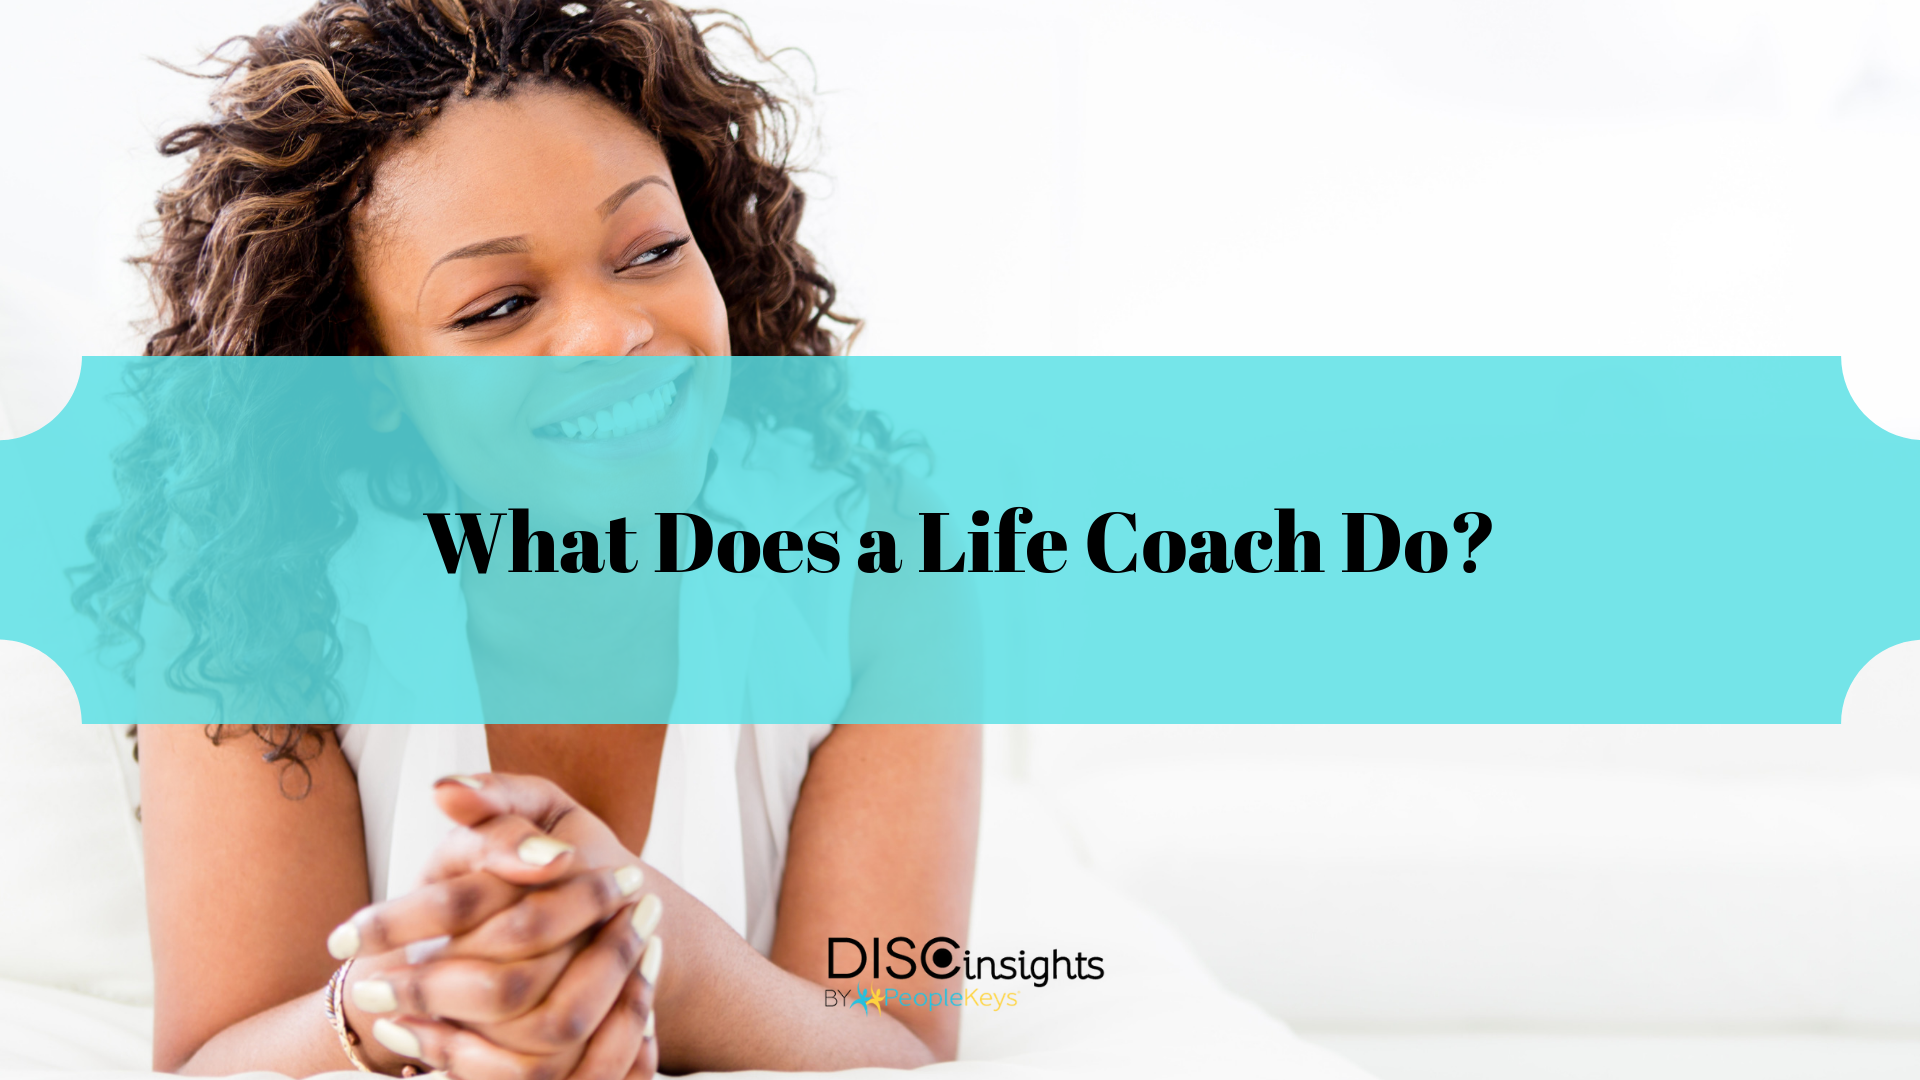 What Does a Life Coach Do?